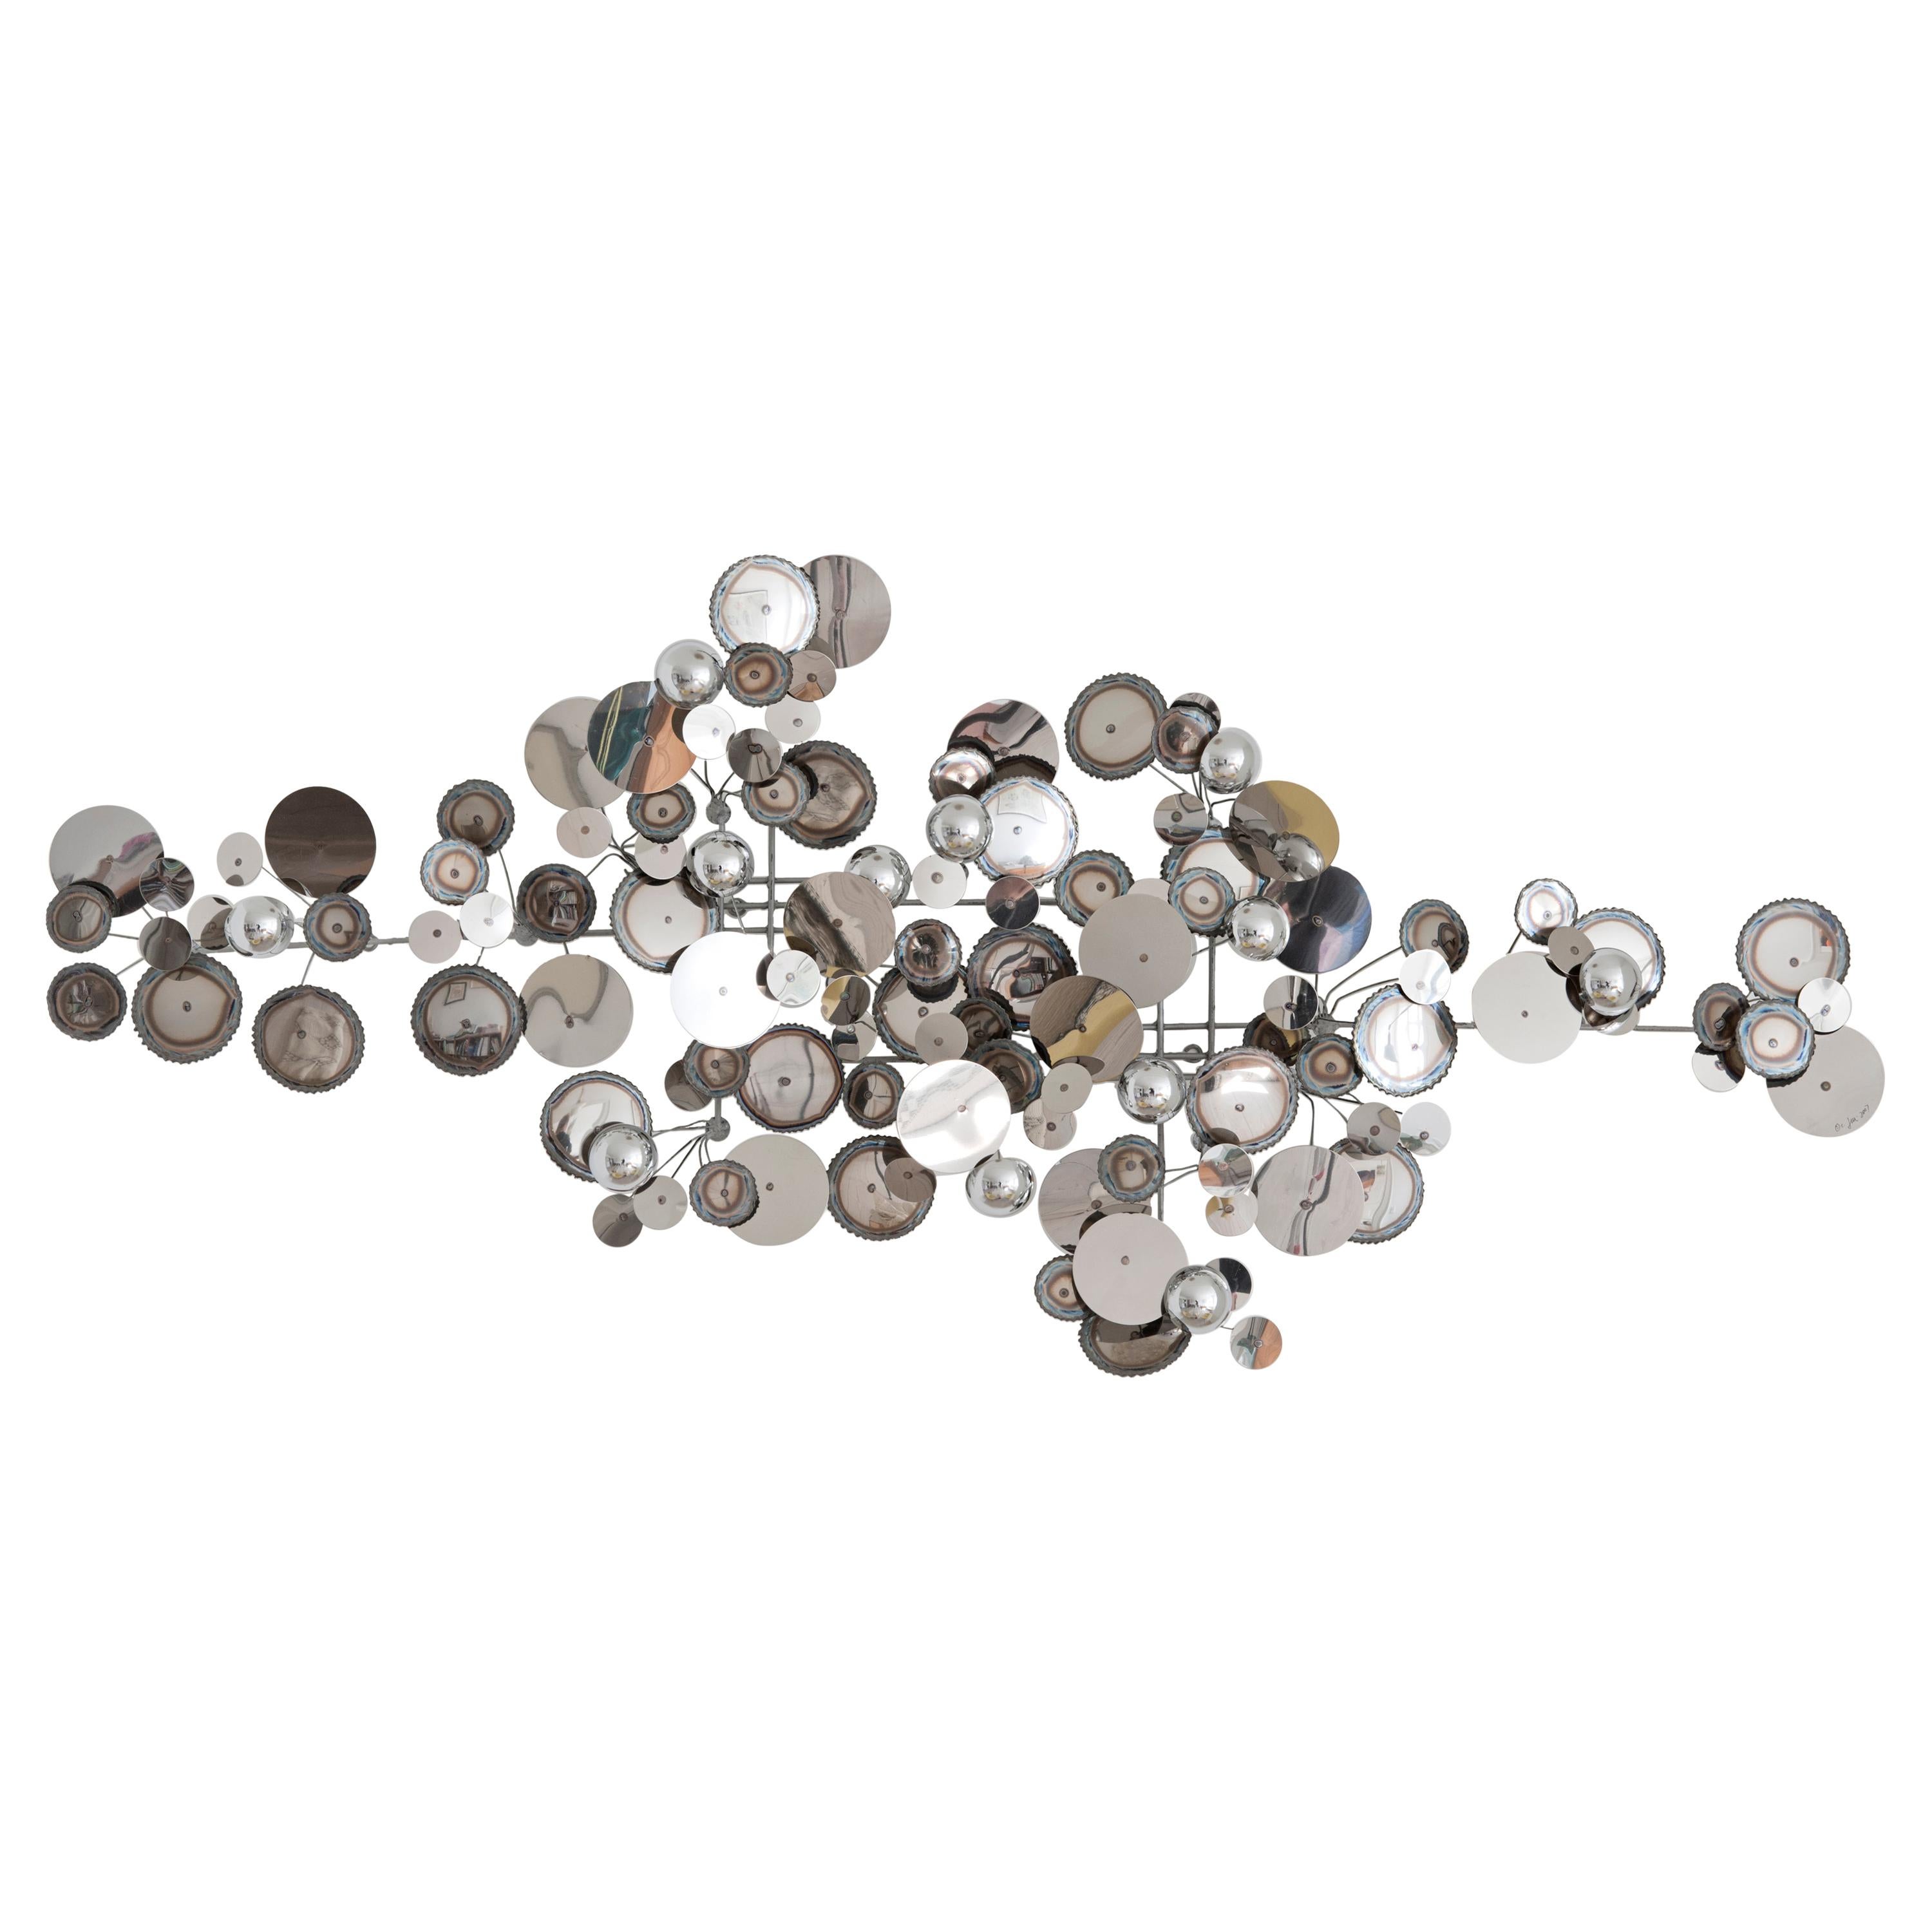 Contemporary Re-edition Curtis Jere Raindrops Wall Sculpture In Chrome